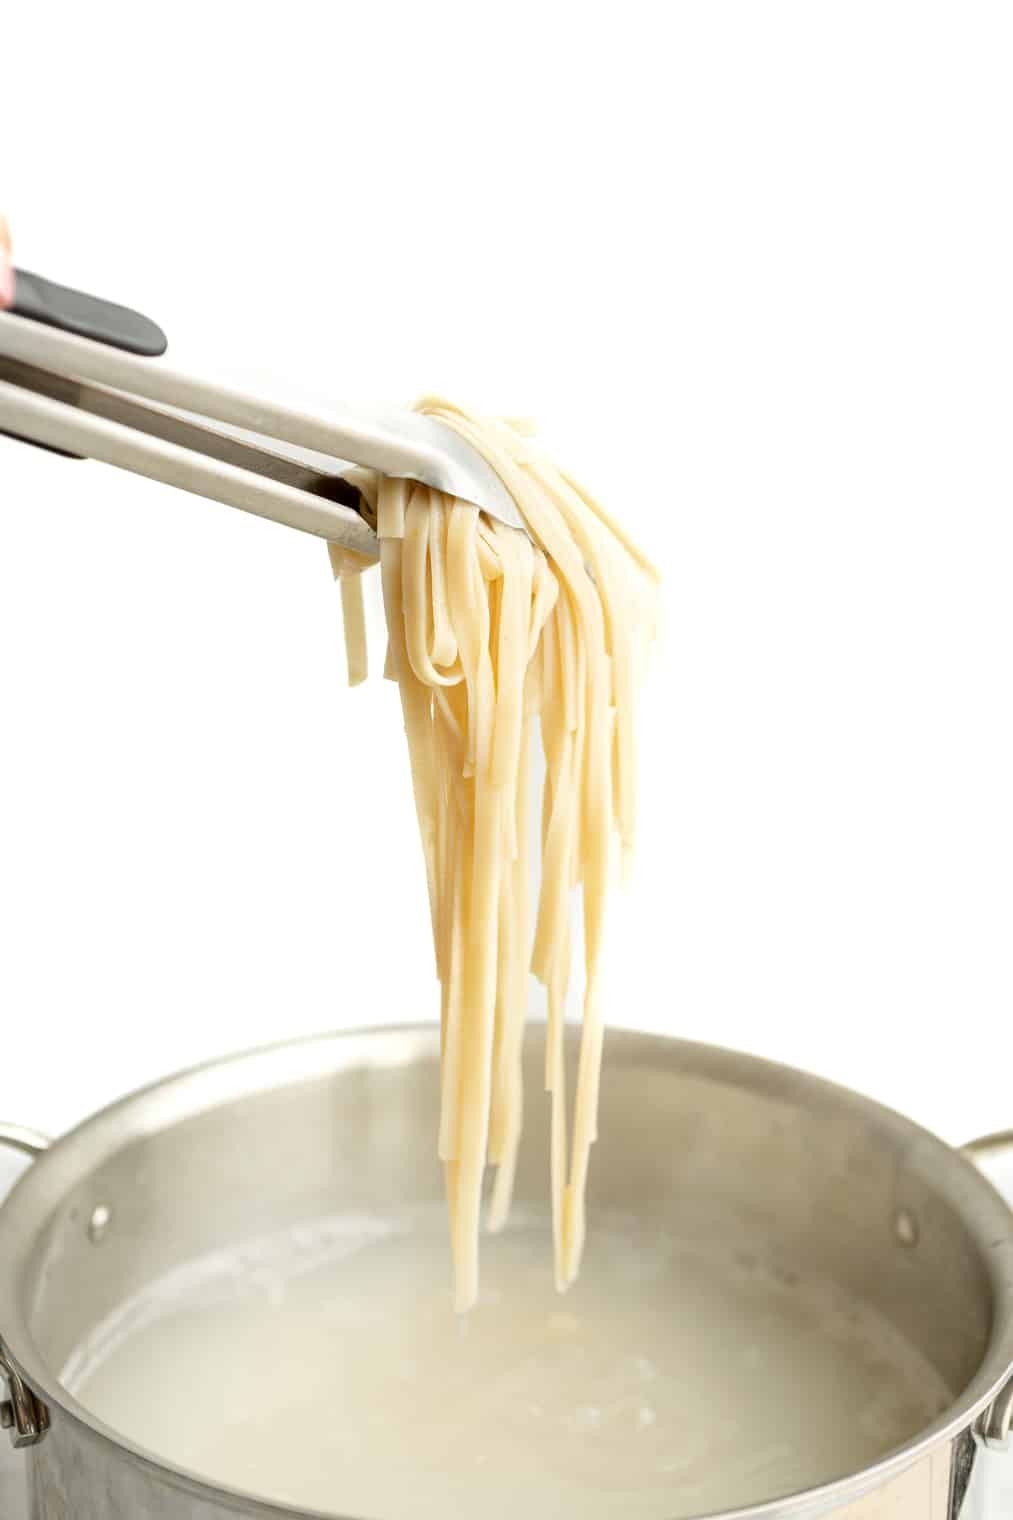 A person using tongs to hold al dente fettuccine noodles above a pot of pasta water.